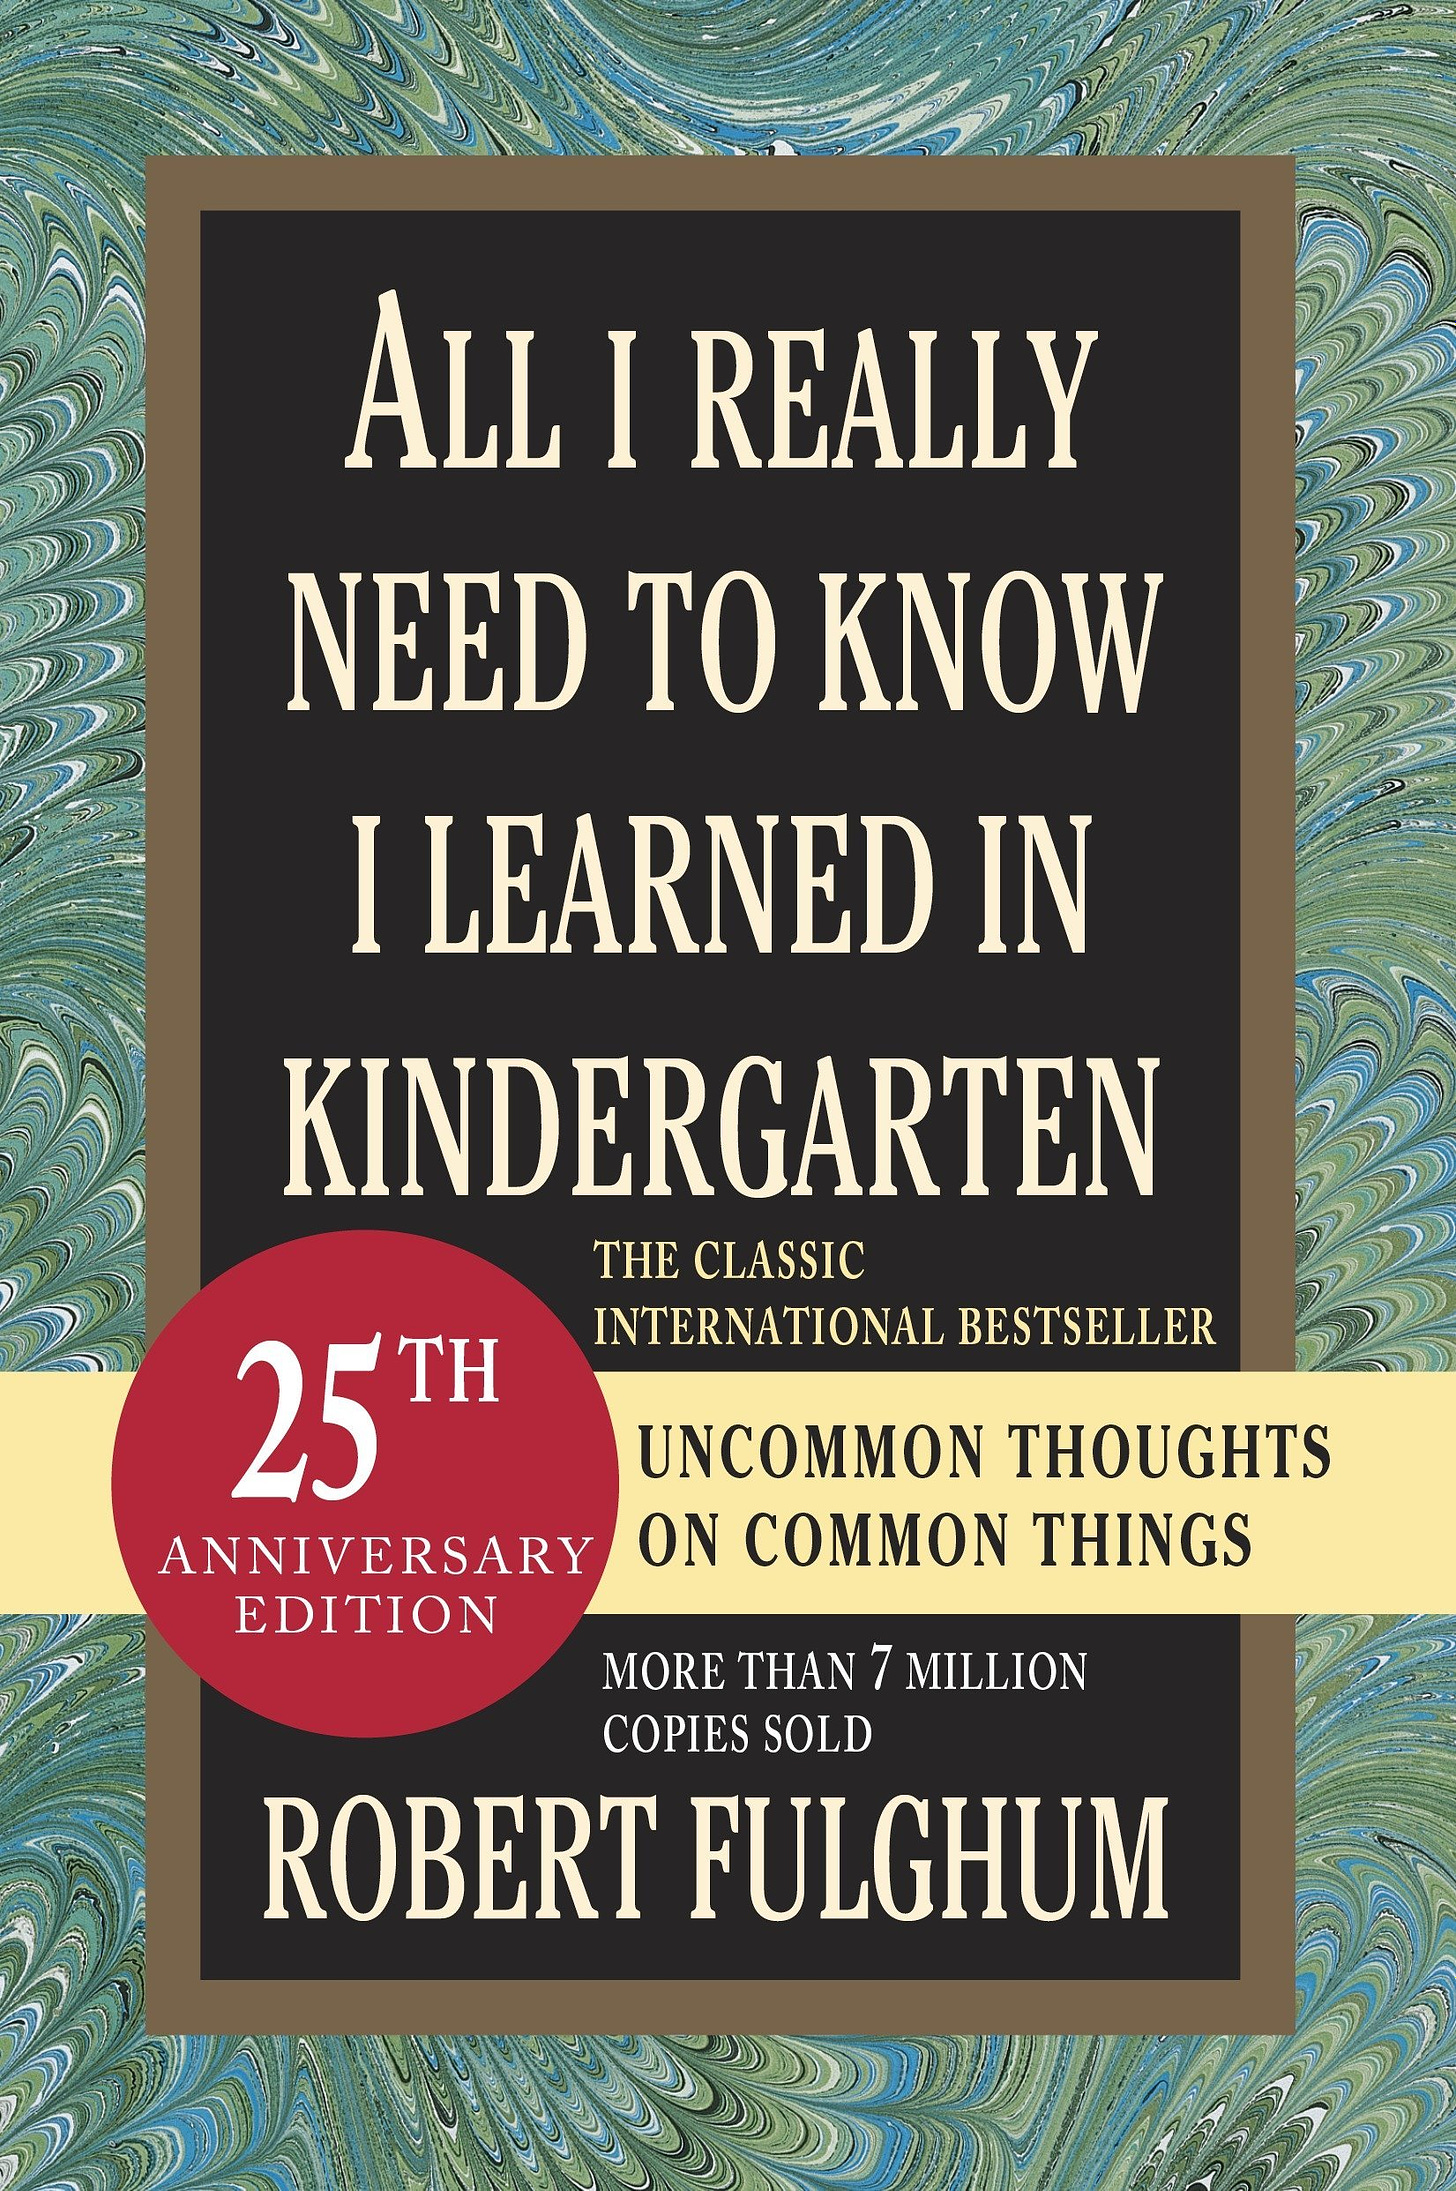 All I Really Need to Know I Learned in Kindergarten: Uncommon Thoughts on  Common Things: Fulghum, Robert: 9780345466396: Amazon.com: Books